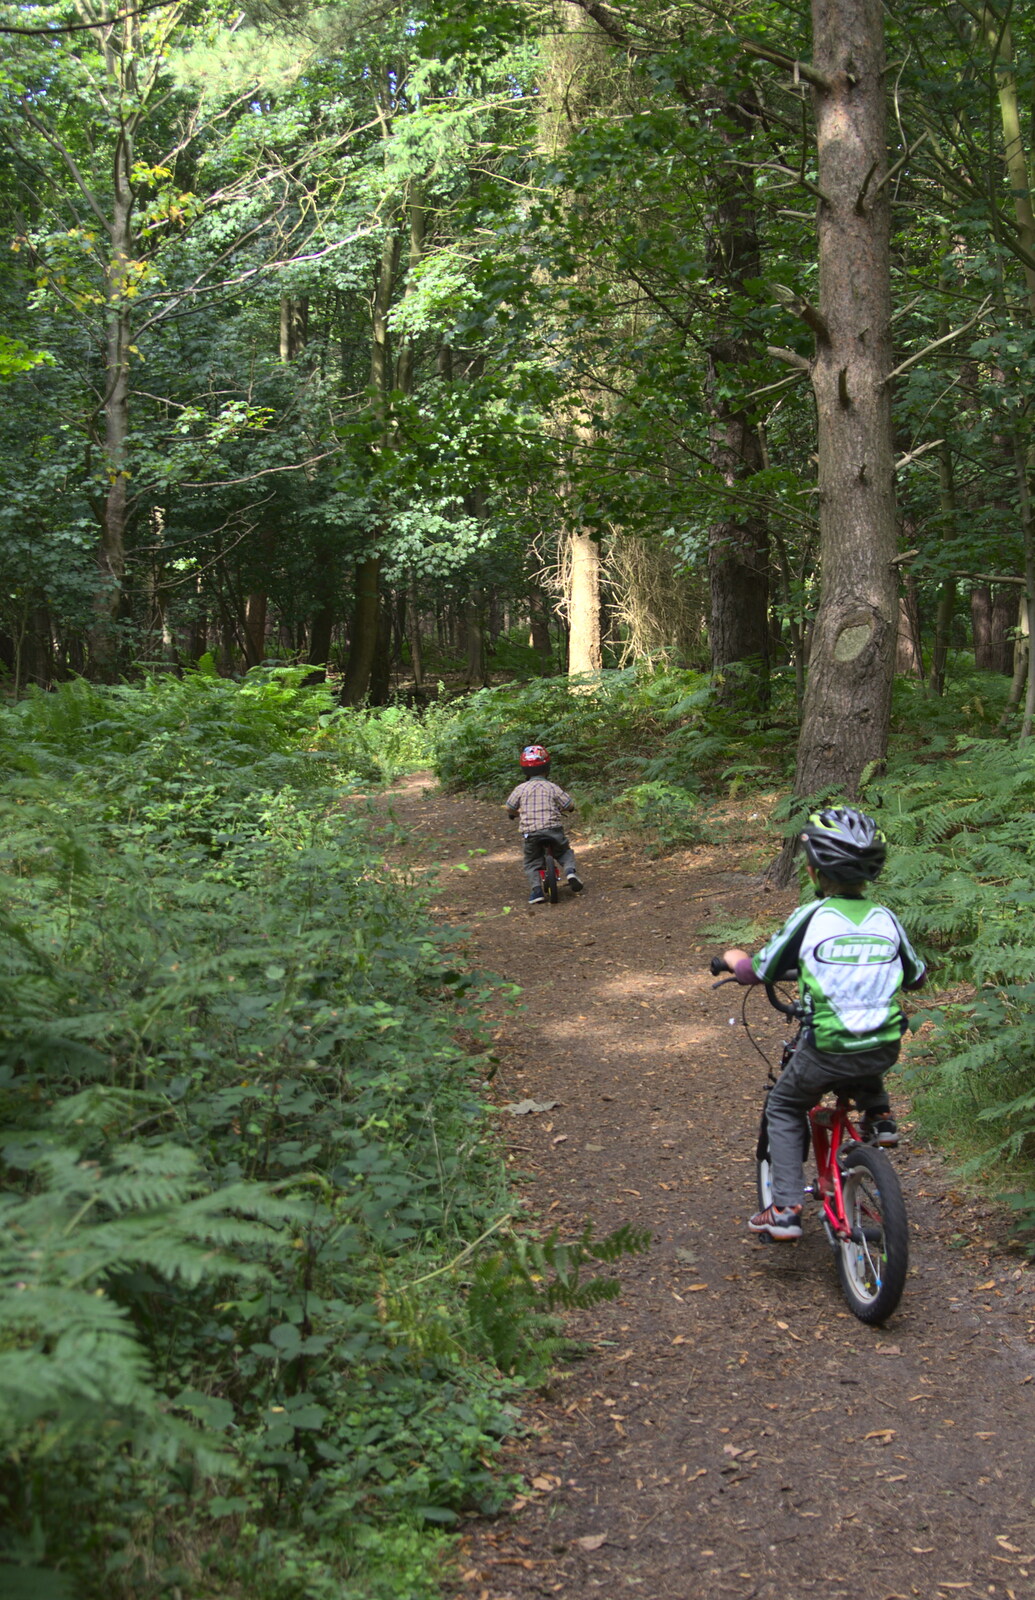 The boys cycle off in to the woods from The Archaeology of Dunwich: A Camping Trip, Dunwich, Suffolk - 1st August 2015